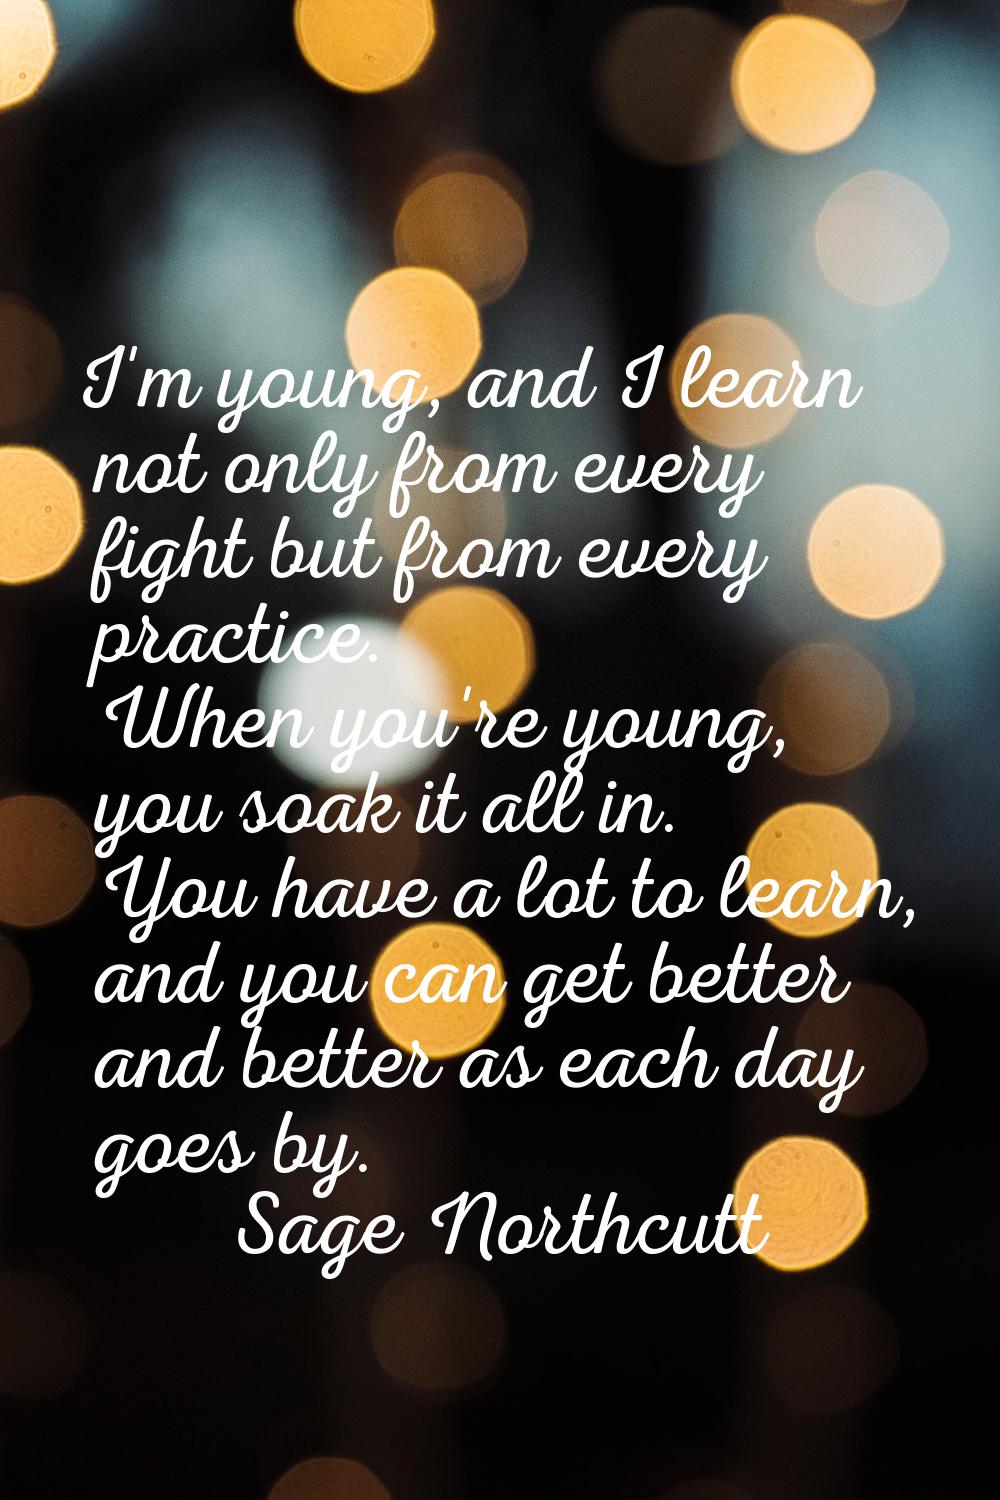 I'm young, and I learn not only from every fight but from every practice. When you're young, you so